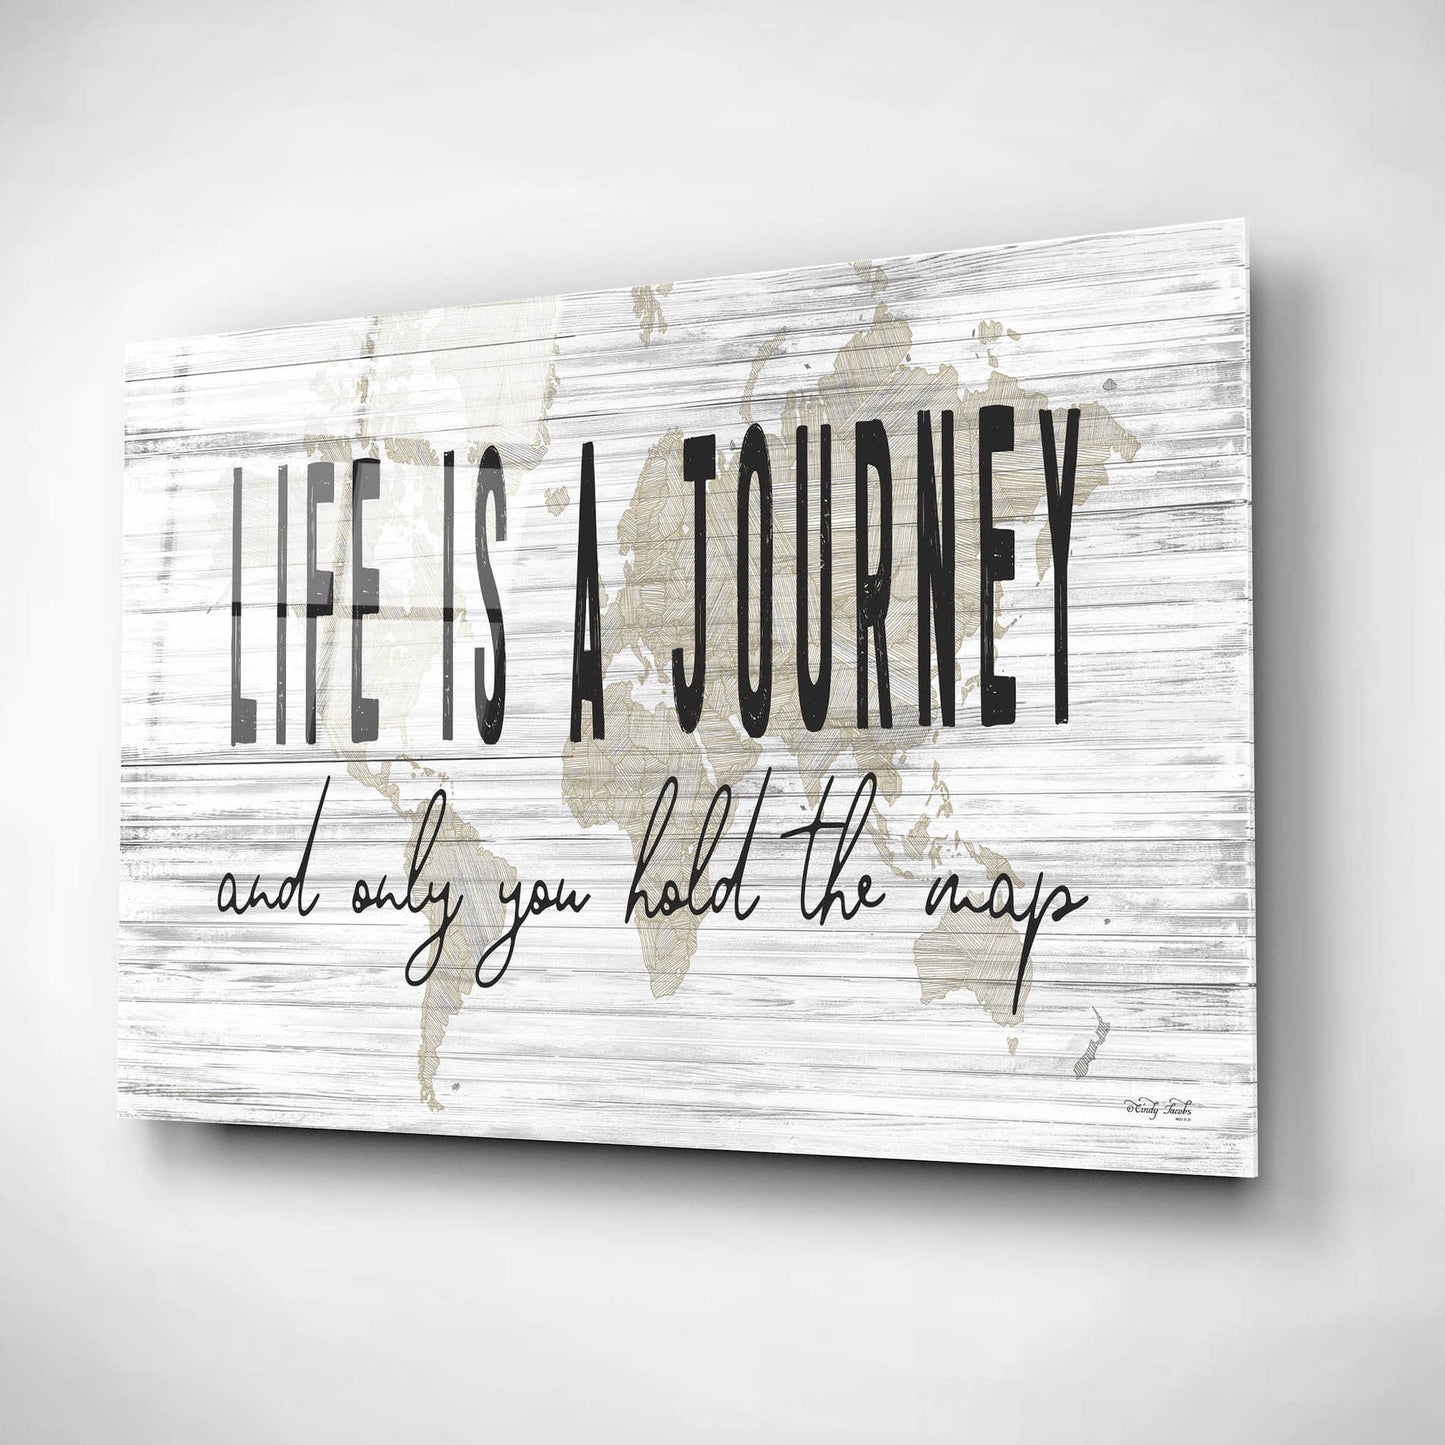 Epic Art 'Life is a Journey' by Cindy Jacobs, Acrylic Glass Wall Art,16x12